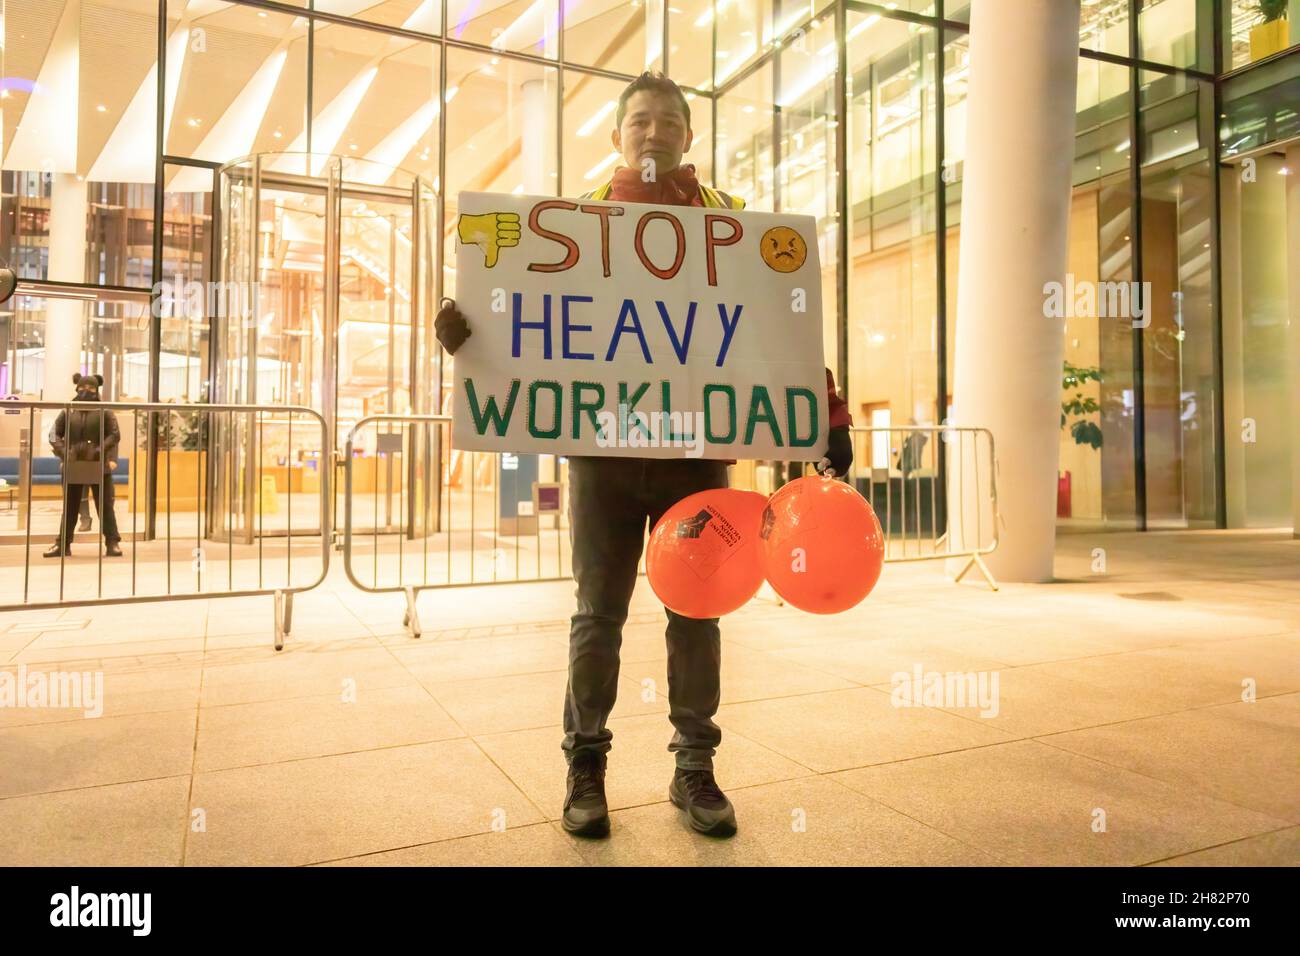 A protestor is seen holding a placard that says 'Stop heavy workload' during a protest outside the Facebook headquarters at Warren Street in London.The group of protesters led by the Independent Workers Union protested at the Facebook London office after it increased workload without a salary increase. Jones Lang LaSalle (JLL) has outsourced the cleaning obligations to Churchill Services to clean the office of Facebook. Also, they allegedly mistreated the cleaners which resulted to the protest. (Photo by Belinda Jiao/SOPA Images/Sipa USA) Stock Photo